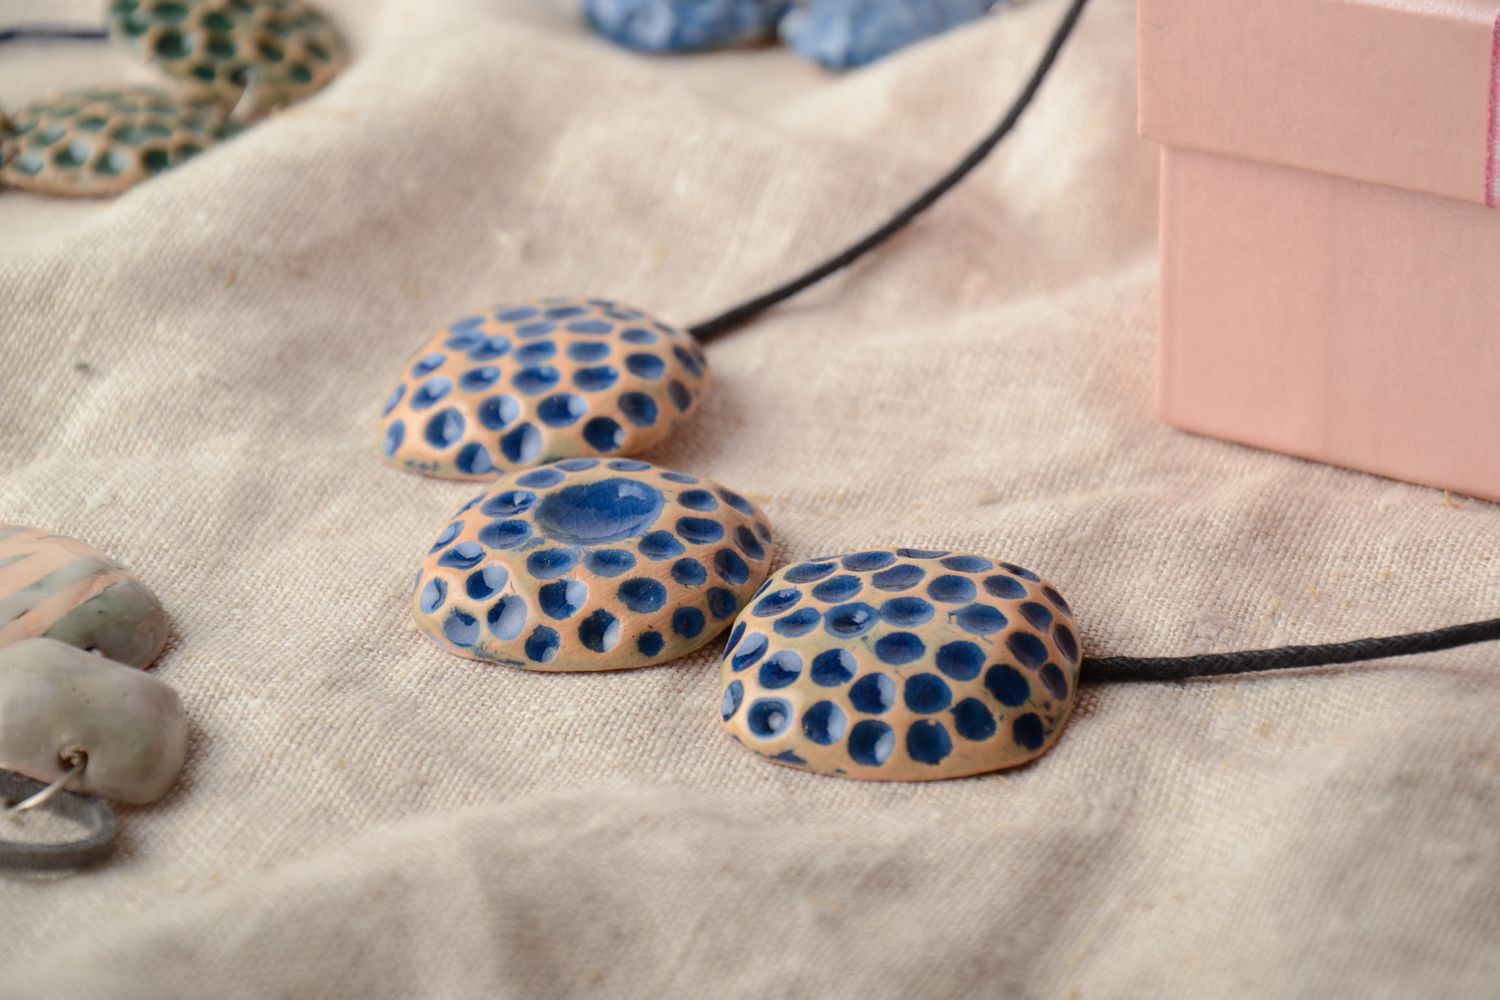 Blue polka dot clay pendant painted with enamel photo 1